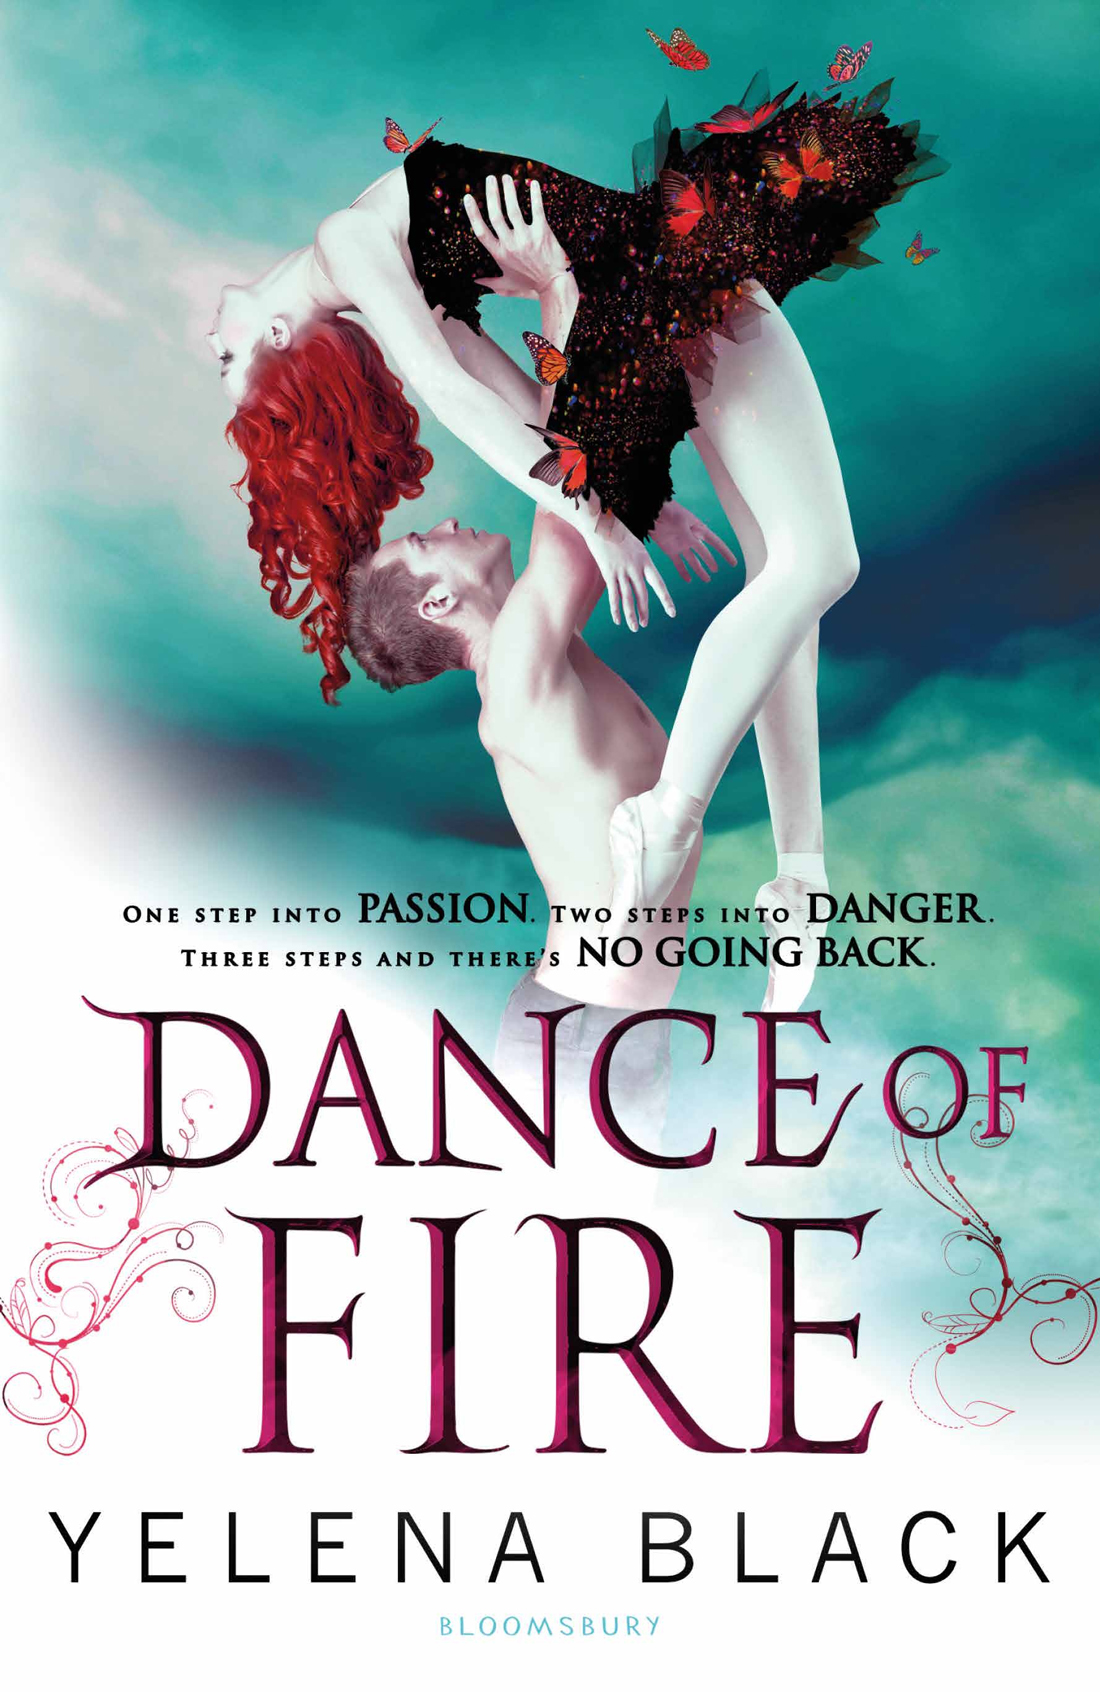 Dance of Fire by Yelena Black